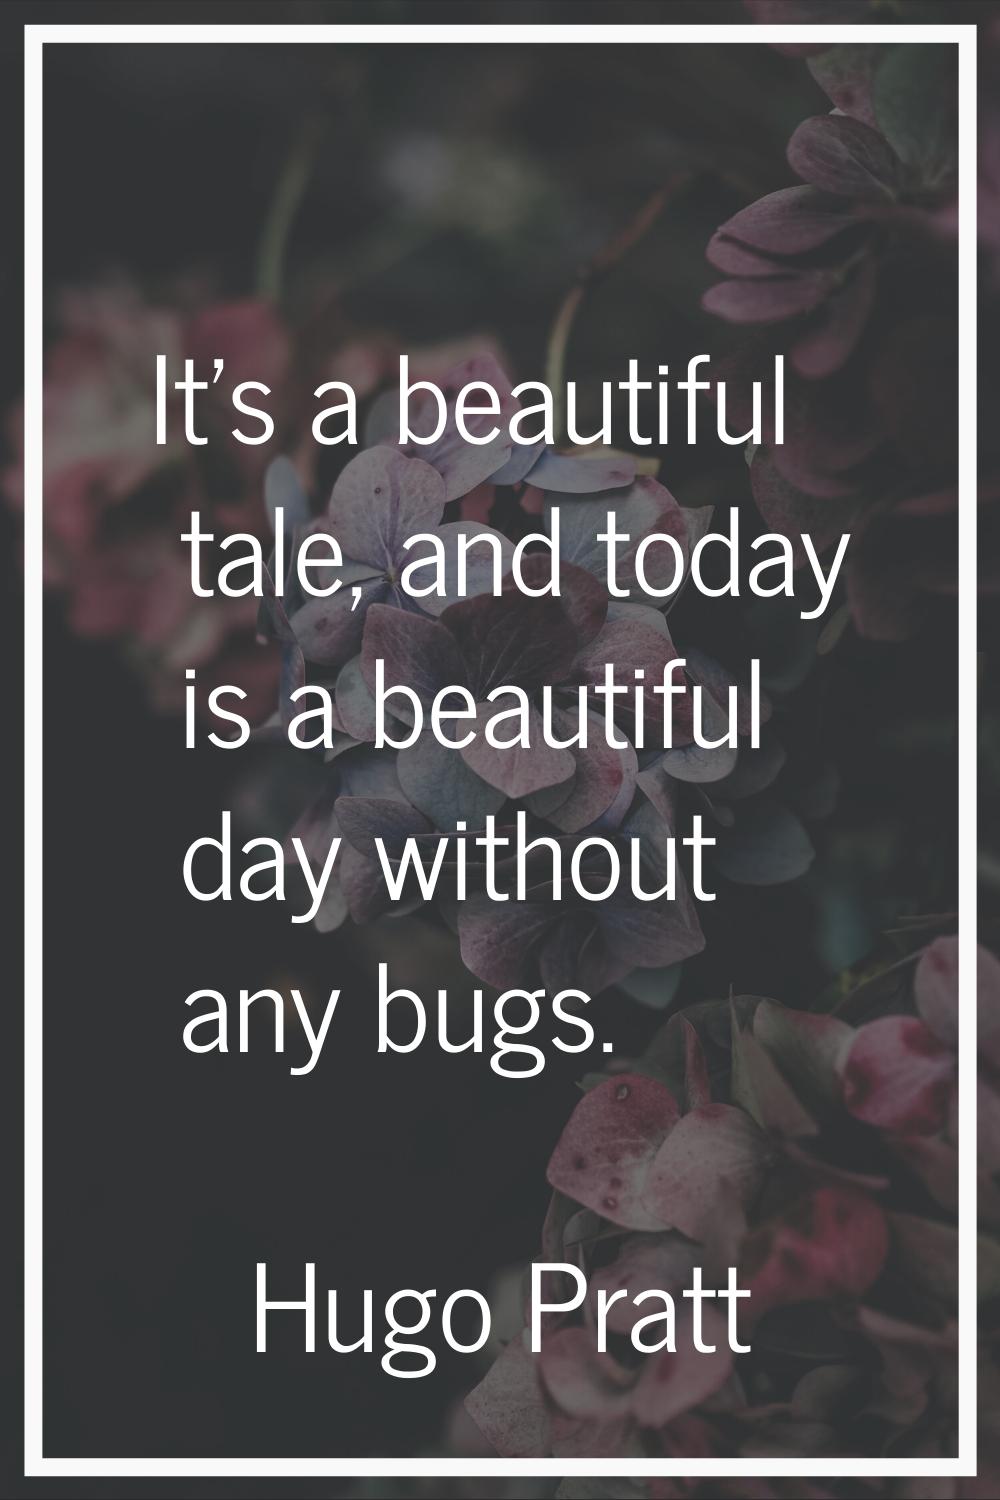 It's a beautiful tale, and today is a beautiful day without any bugs.